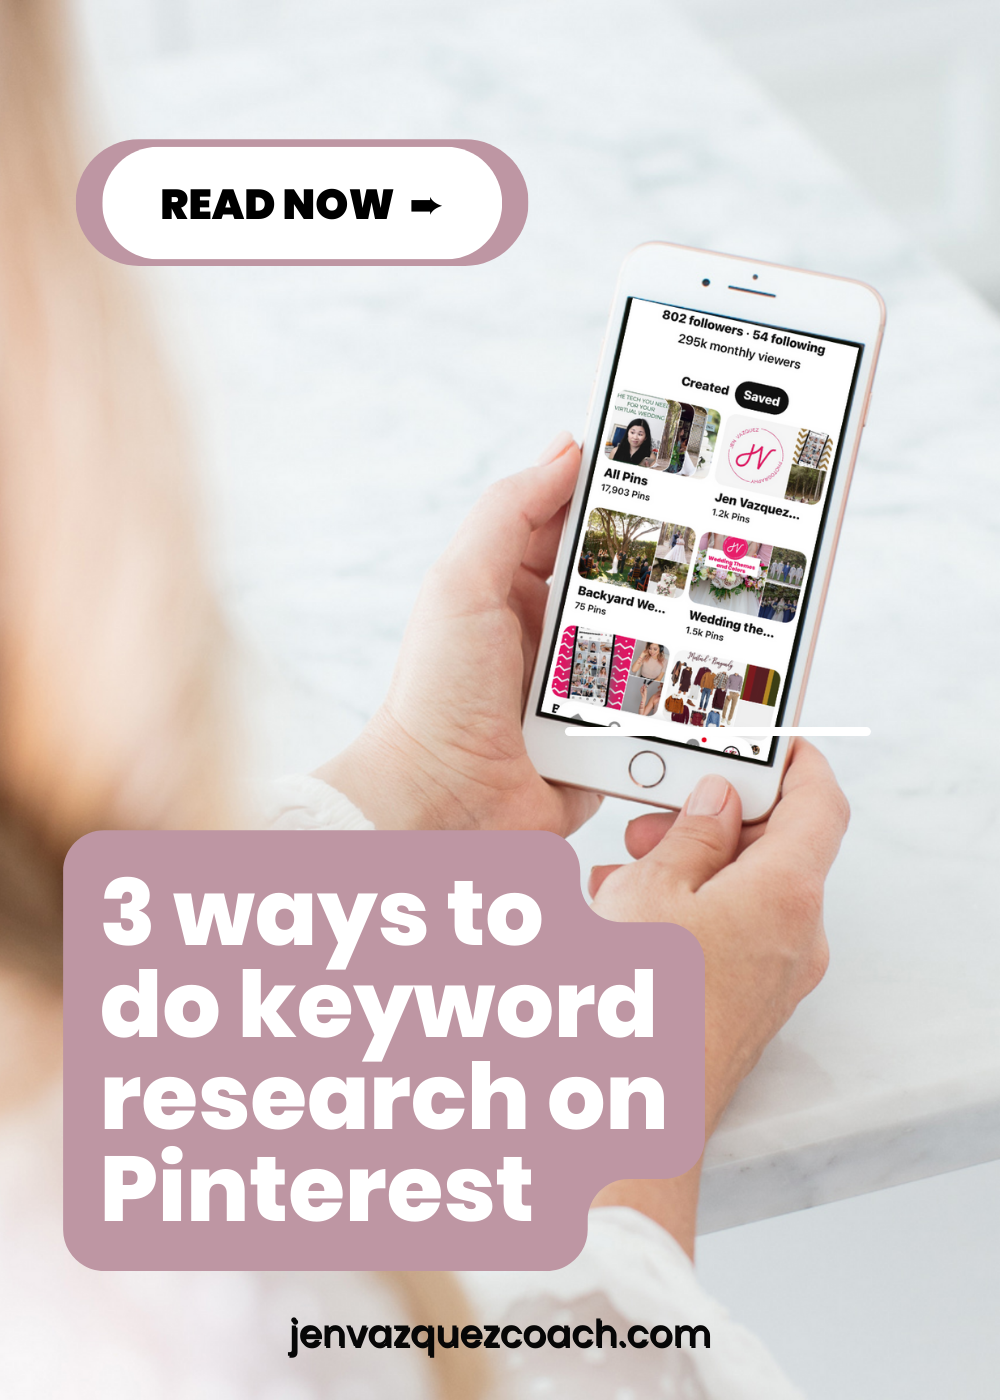 3 ways to do keyword research on Pinterest THE LAST ONE IS MY FAVORITE